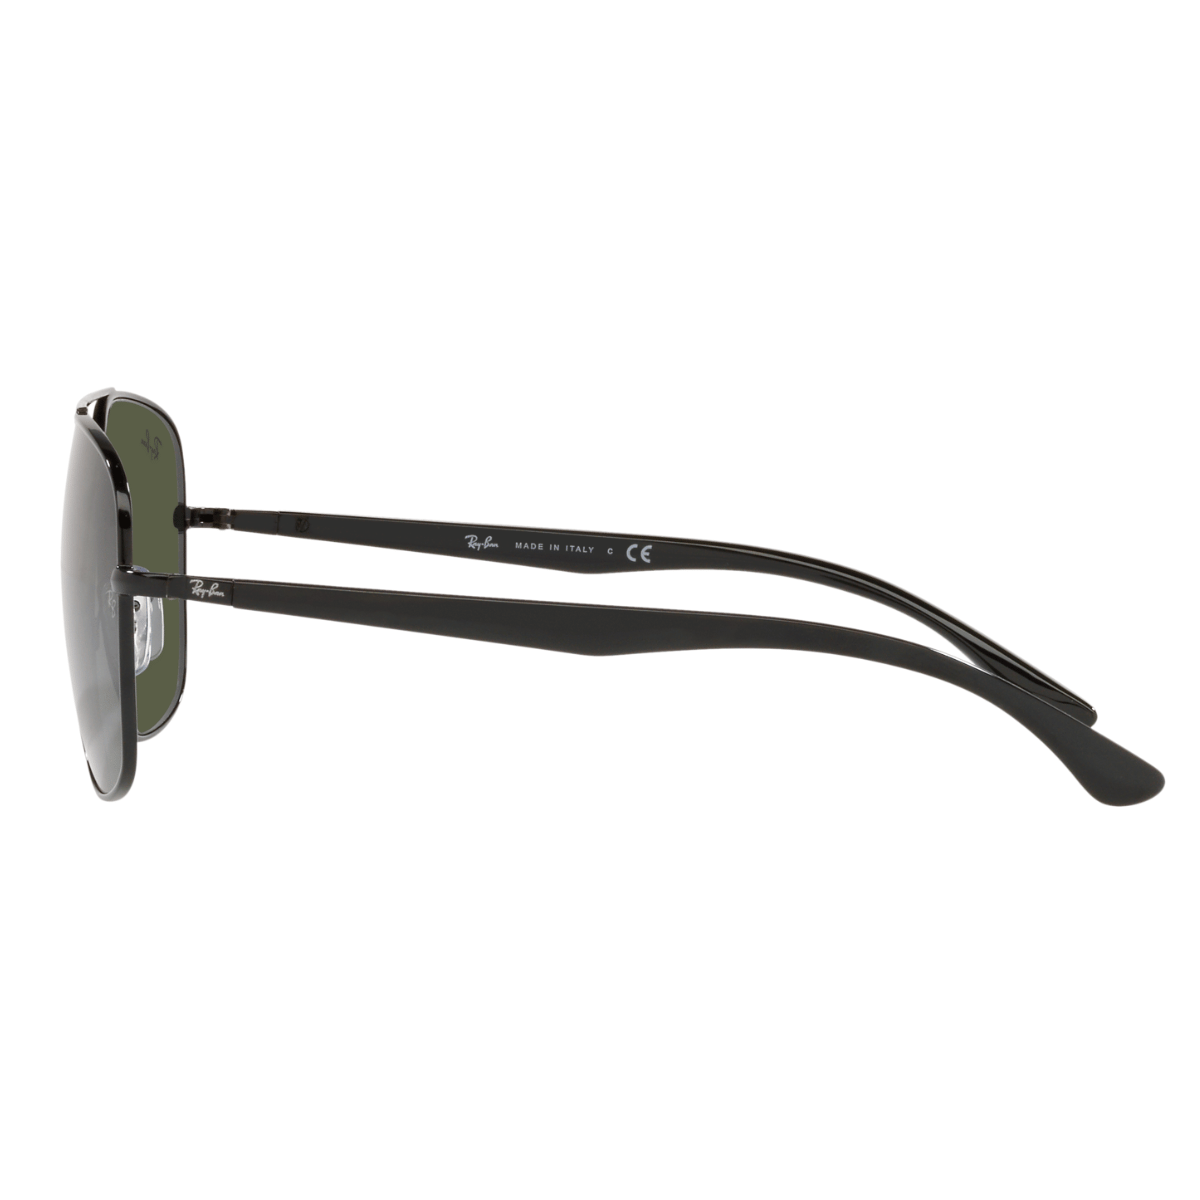 "Sleek Rayban 3683 sunglasses featuring polished black frames and green lenses, available at Optorium, highlighting a modern twist on classic Rayban style for men."